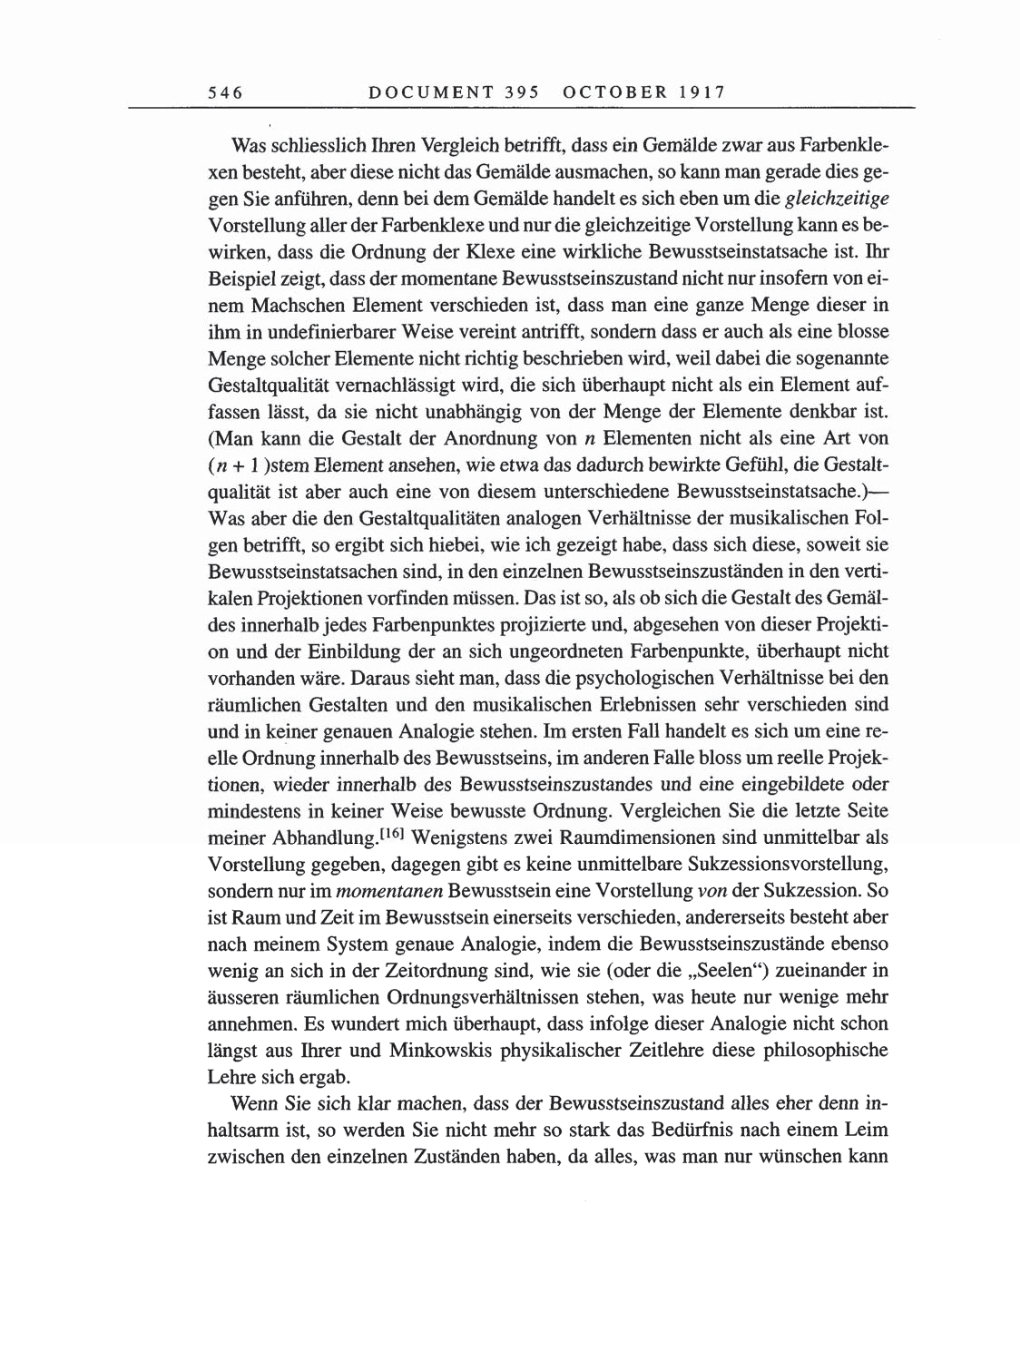 Volume 8, Part A: The Berlin Years: Correspondence 1914-1917 page 546